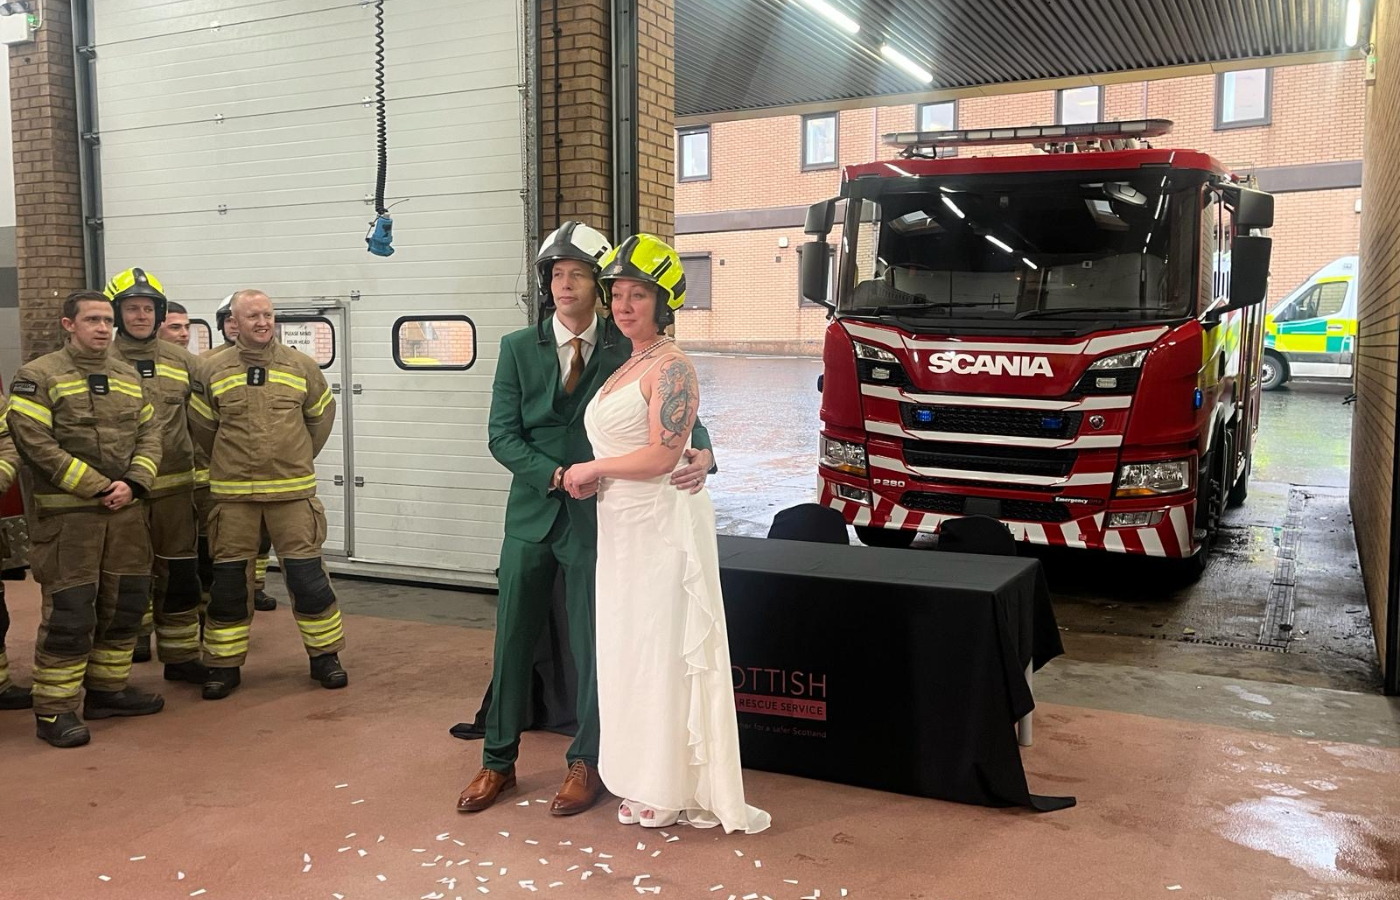 American newlyweds mark big day with unique ceremony in Glasgow fire station.